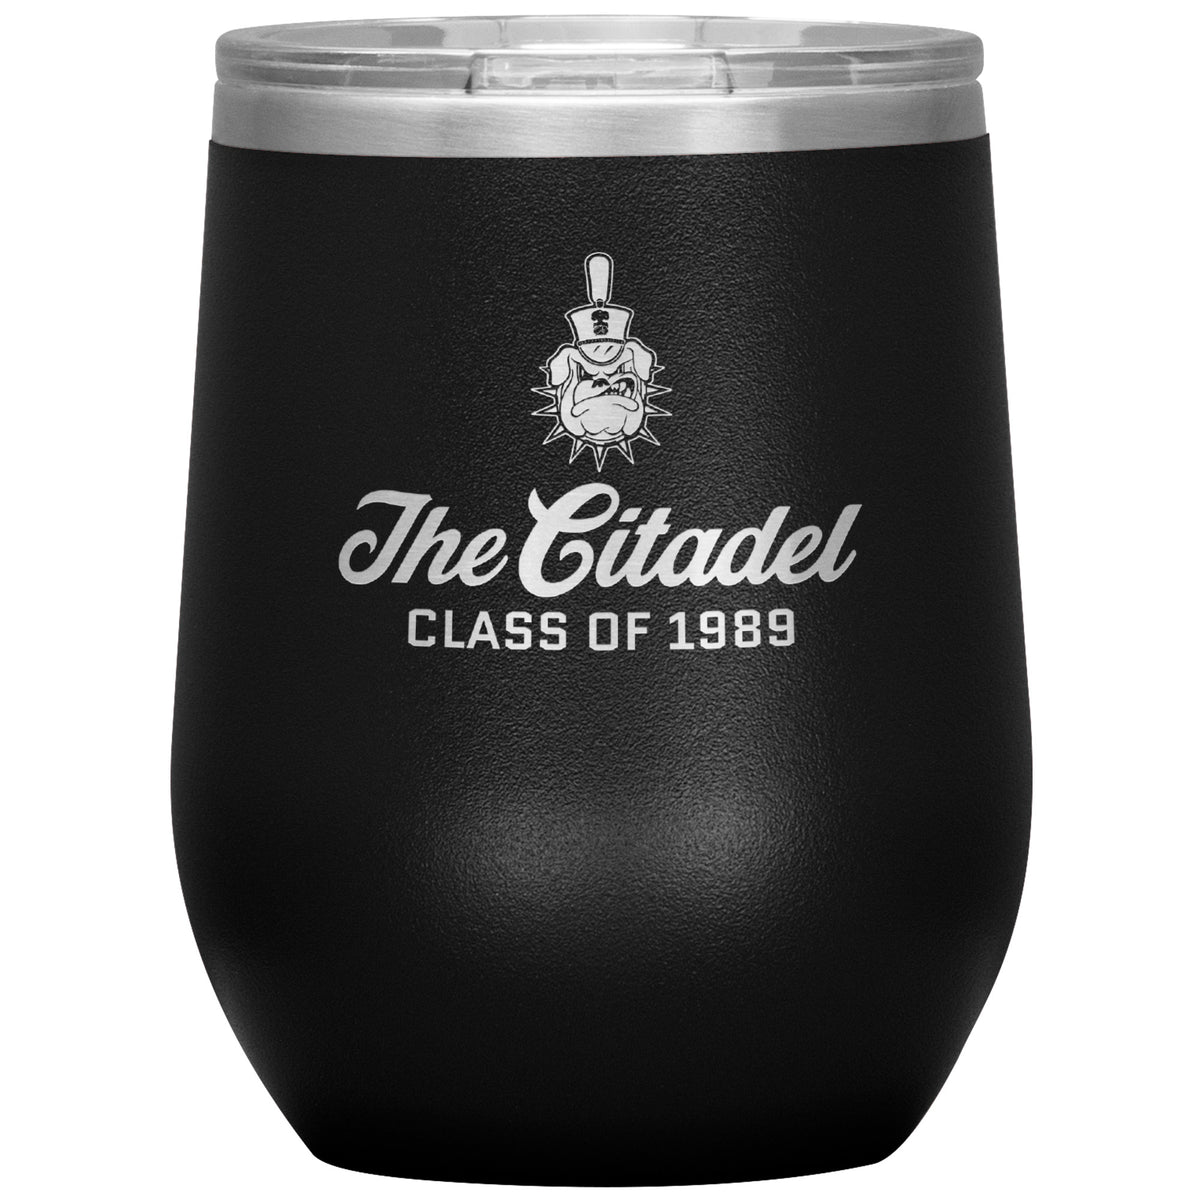 The Citadel Spike, Class of 1989, Wine Insulated Tumbler - 12oz